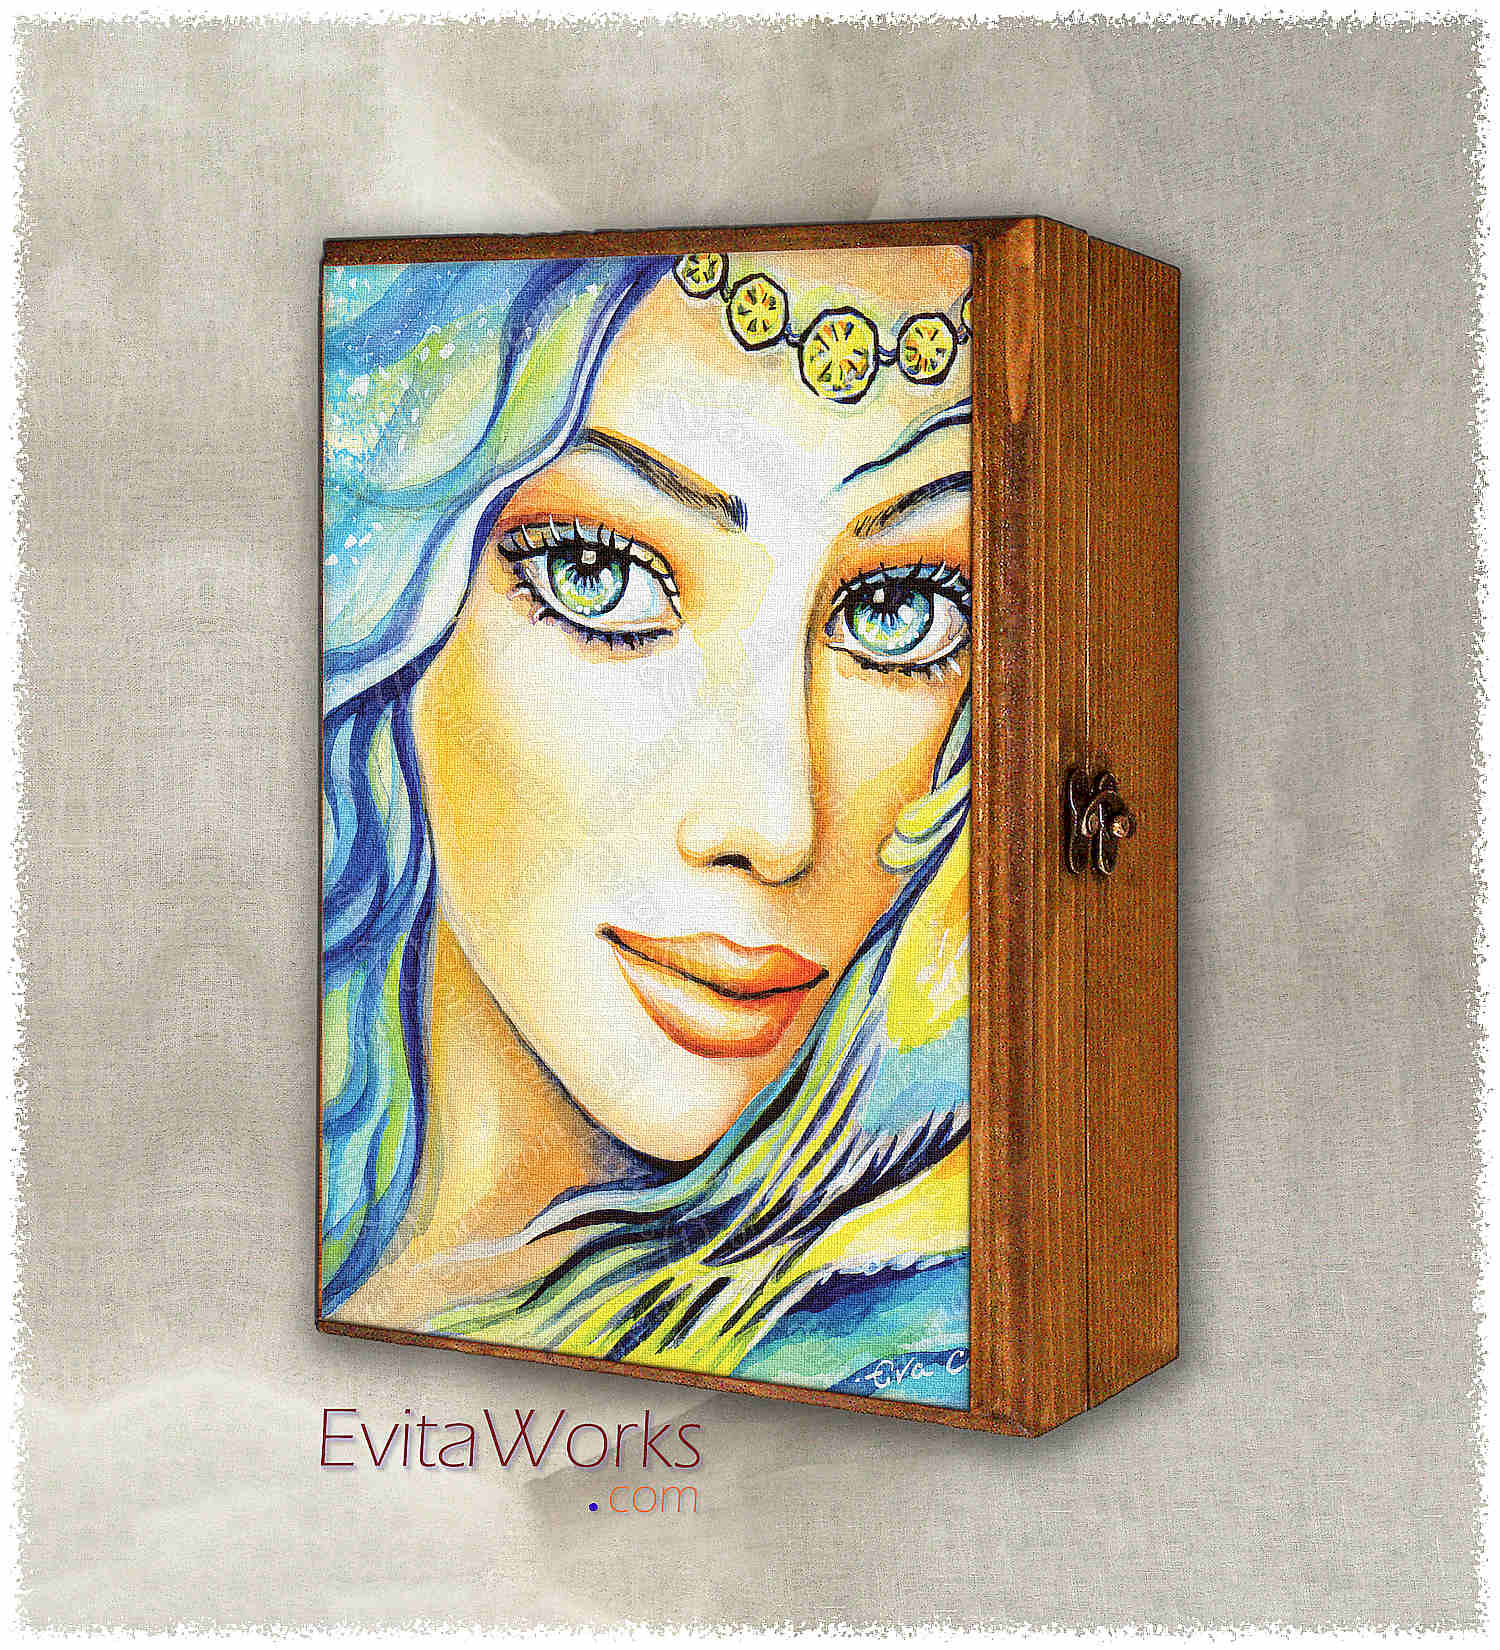 Hit to learn about "Bird of Secrets, fairy, beautiful mythical face" on jewelboxes